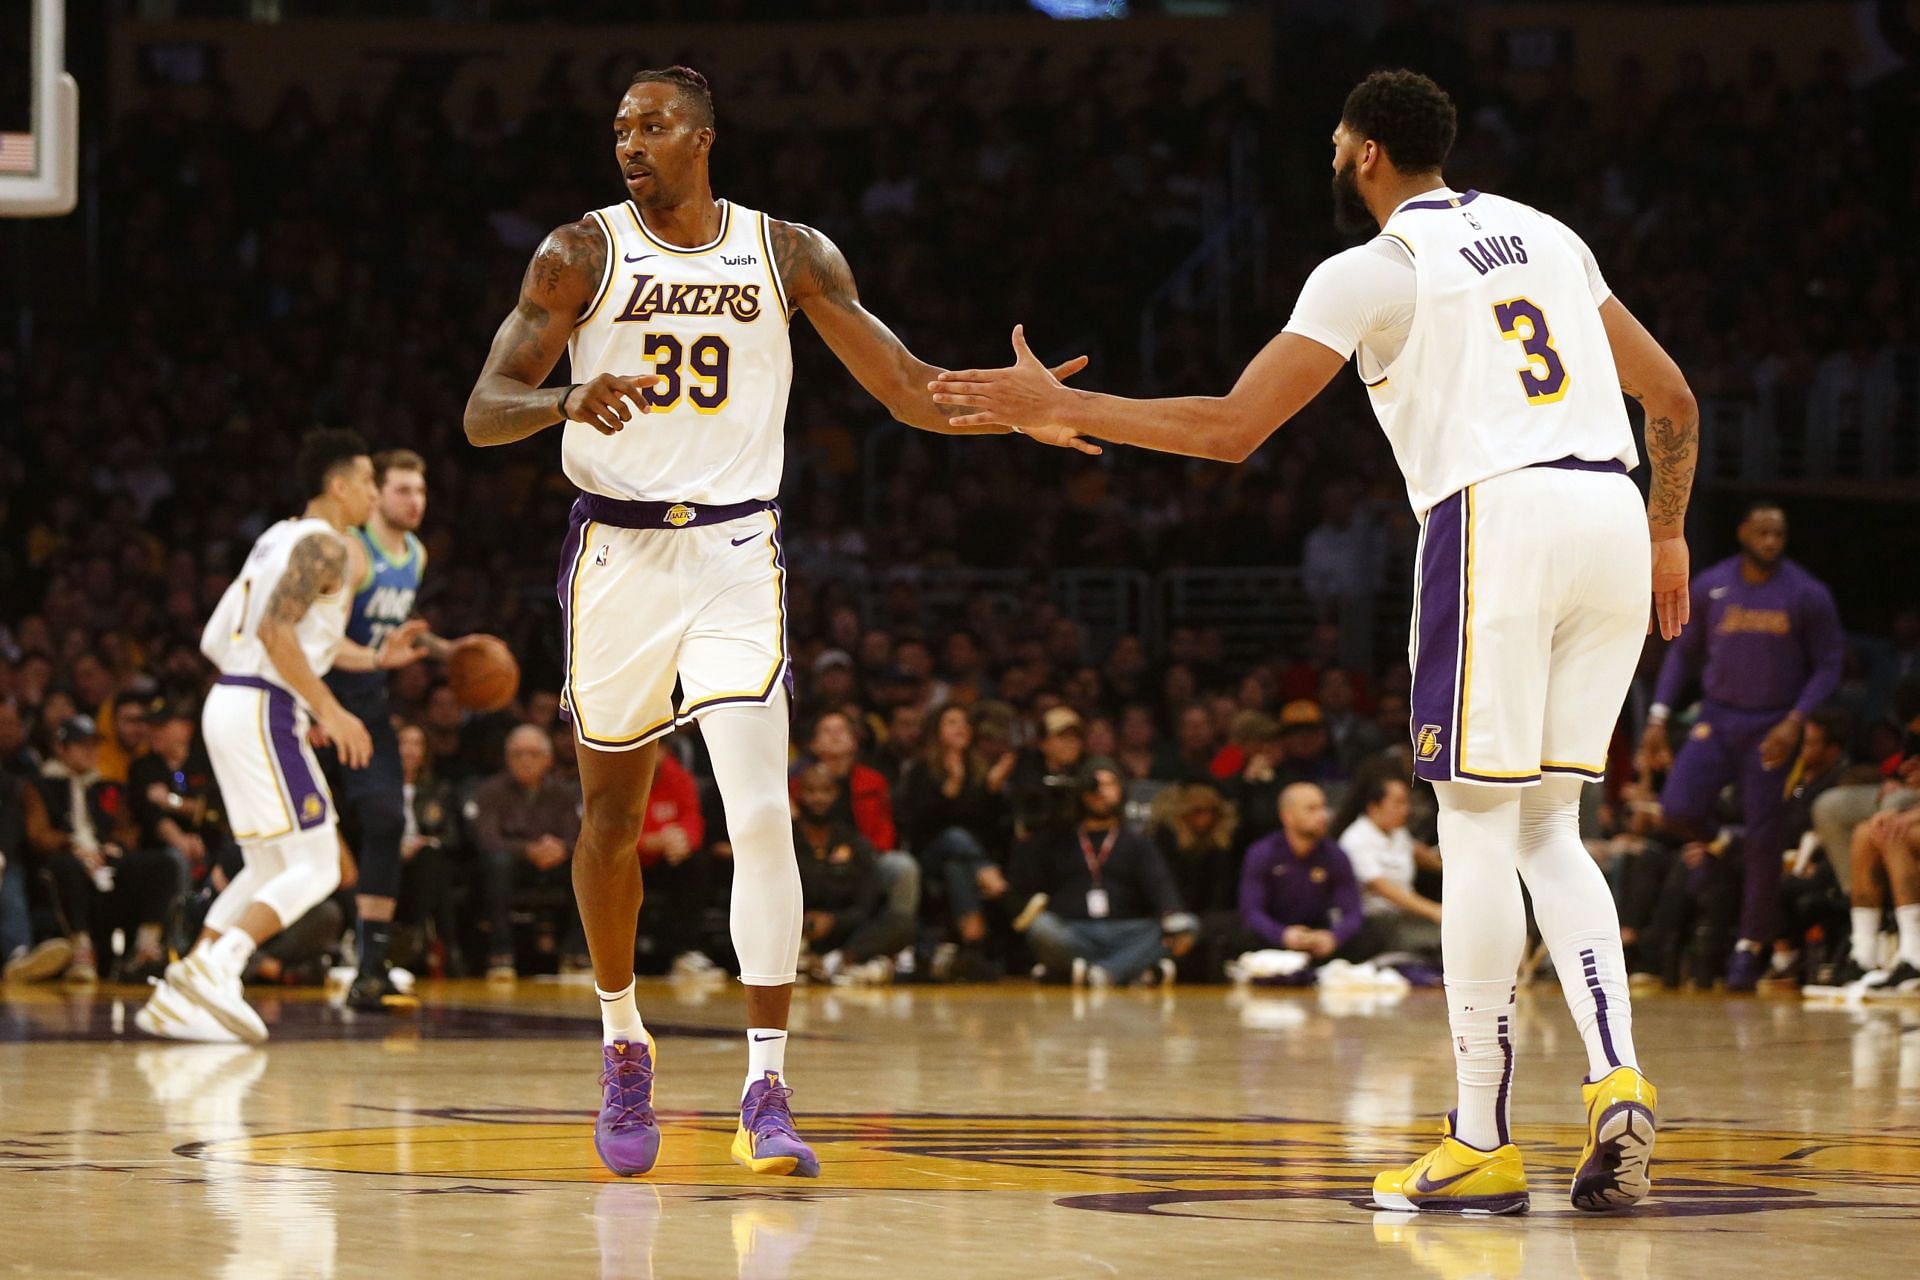 Dwight Howard addressed his altercation with Anthony Davis at the LA Lakers postgame press conference